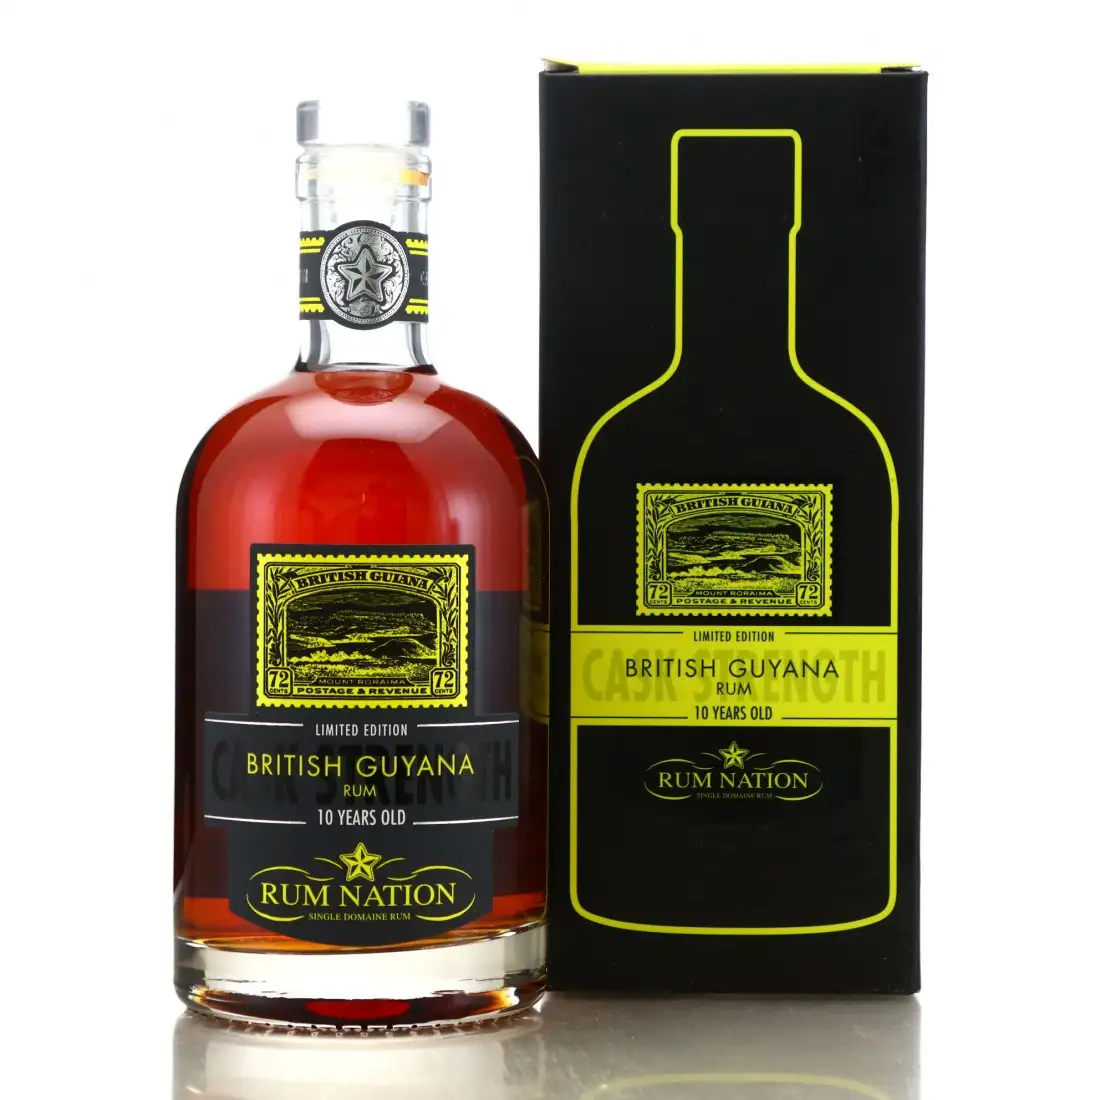 Image of the front of the bottle of the rum British Guyana Limited Edition